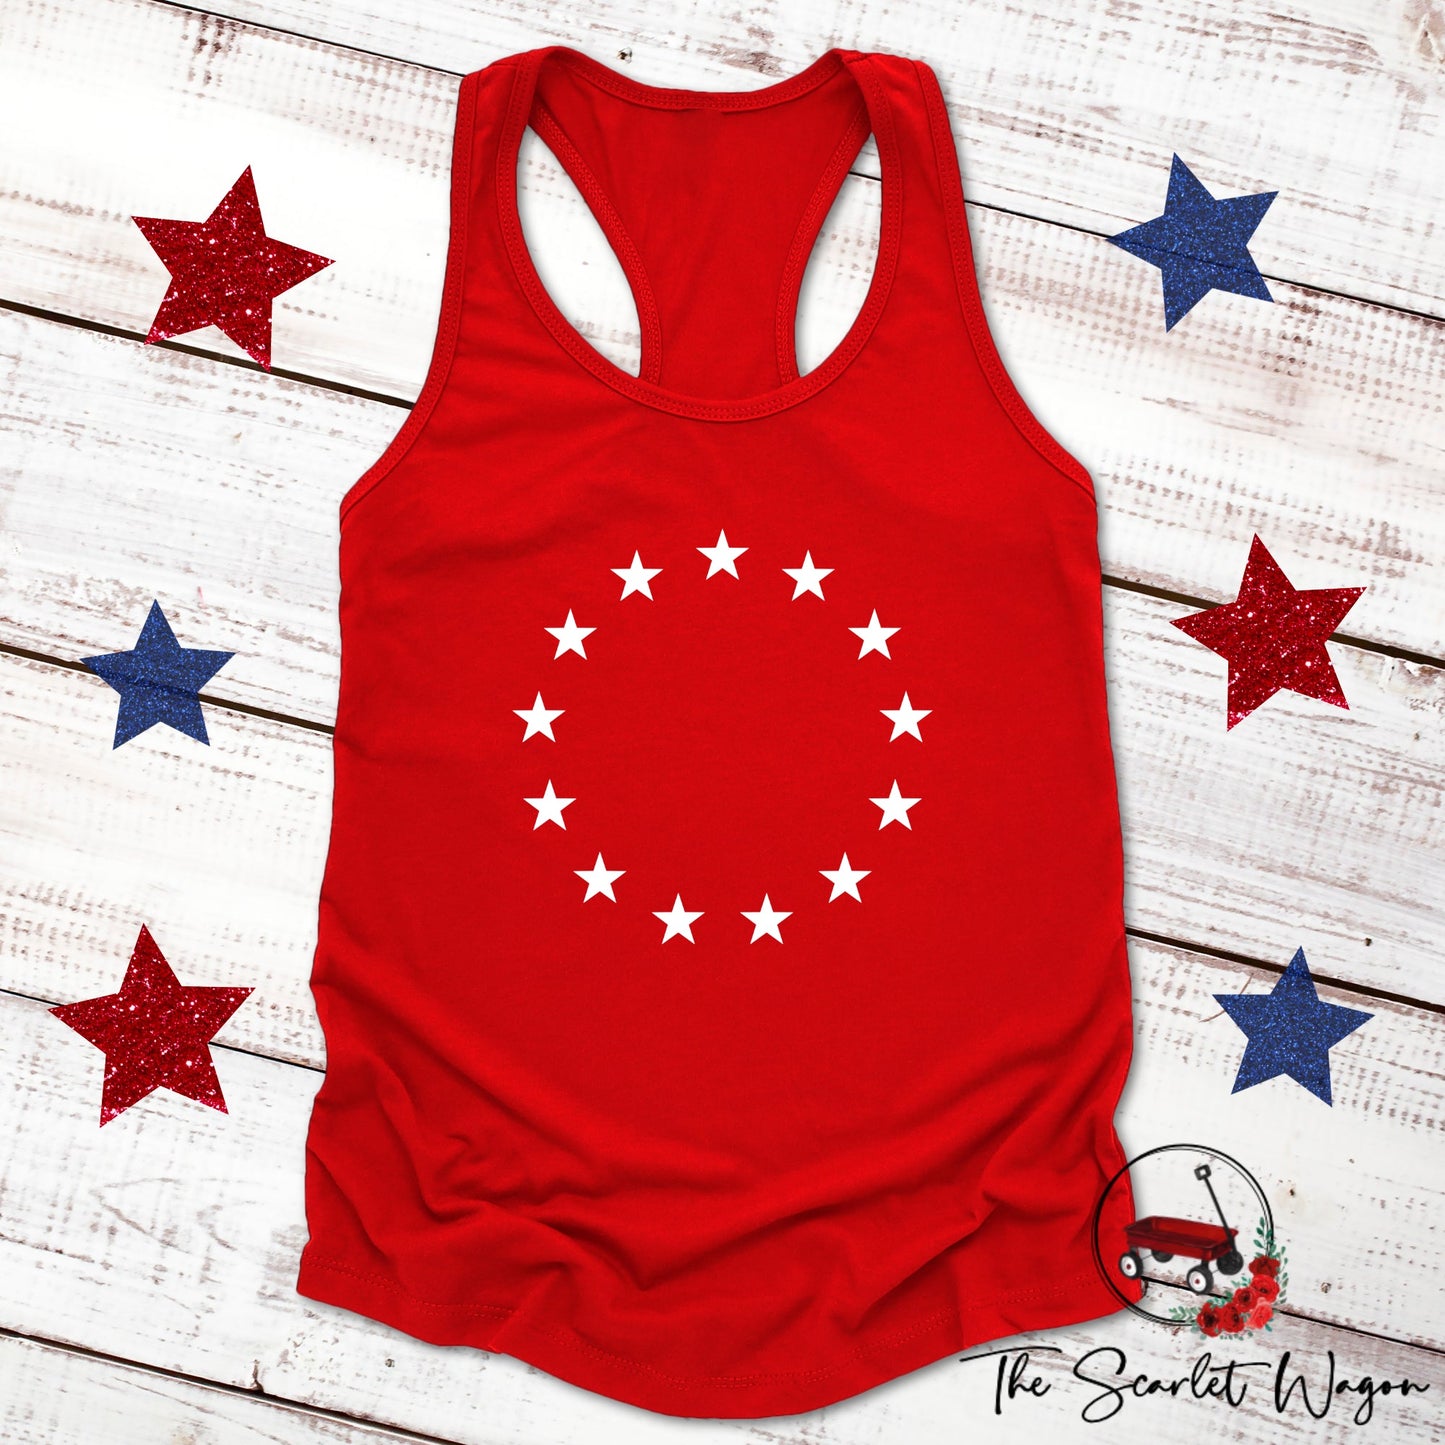 Betsy Ross Flag Women's Racerback Tank Patriotic Shirt The Scarlet Wagon Boutique Red Small 